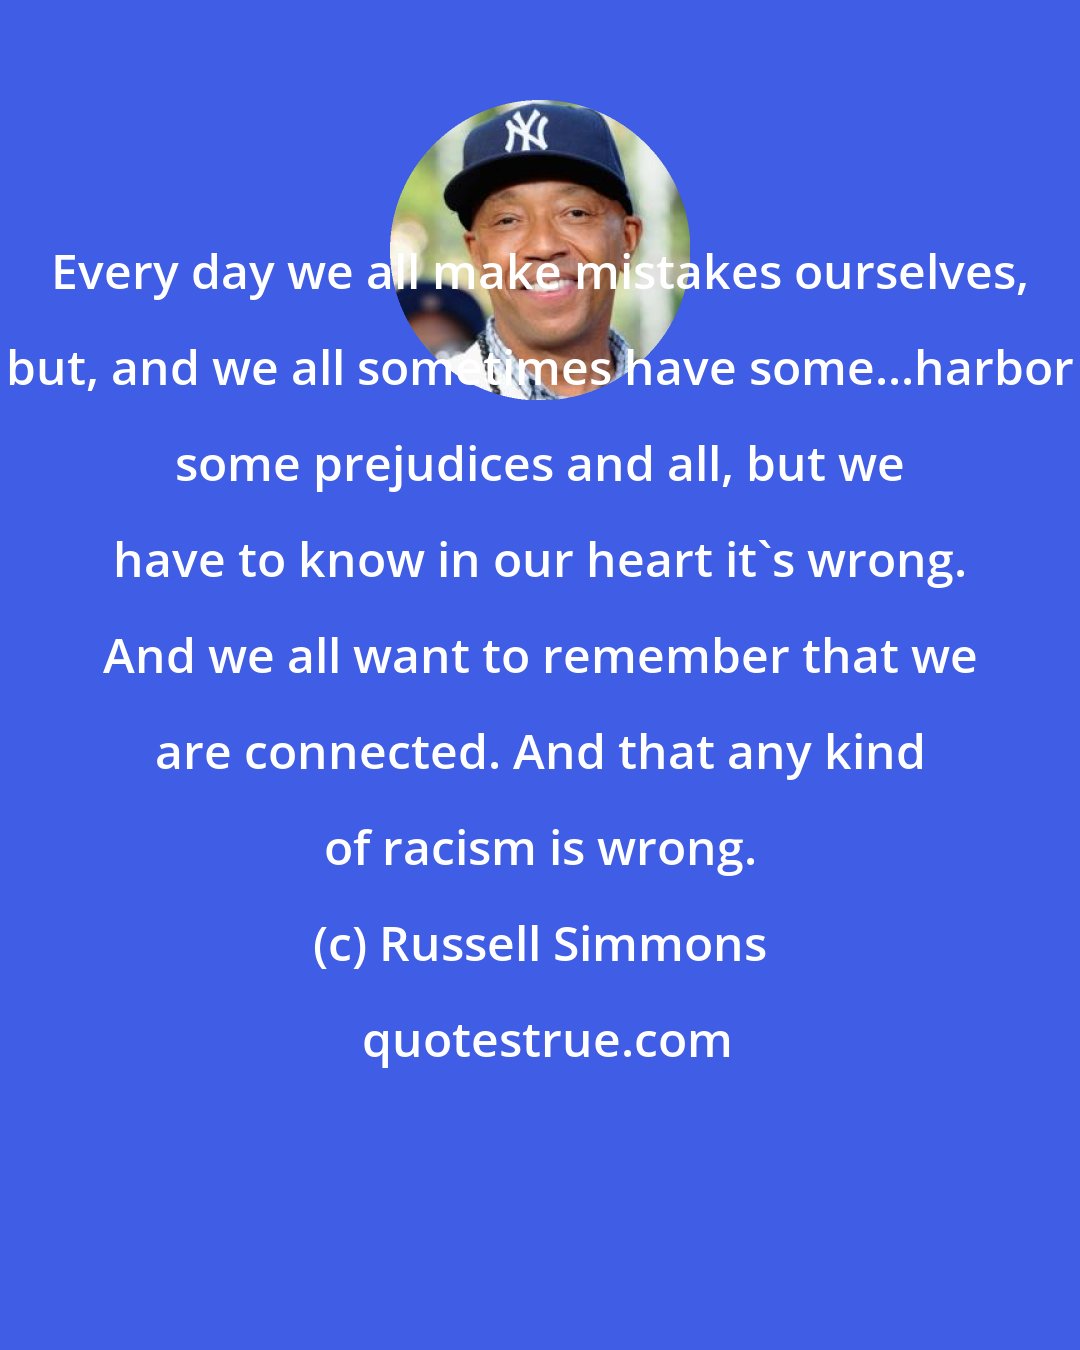 Russell Simmons: Every day we all make mistakes ourselves, but, and we all sometimes have some...harbor some prejudices and all, but we have to know in our heart it's wrong. And we all want to remember that we are connected. And that any kind of racism is wrong.